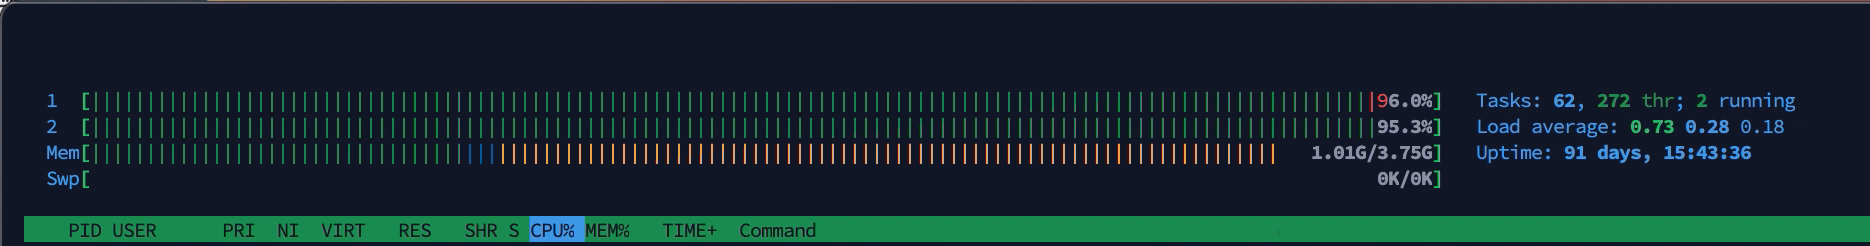 CPU usage during the load test execution on the application with a load balancer.